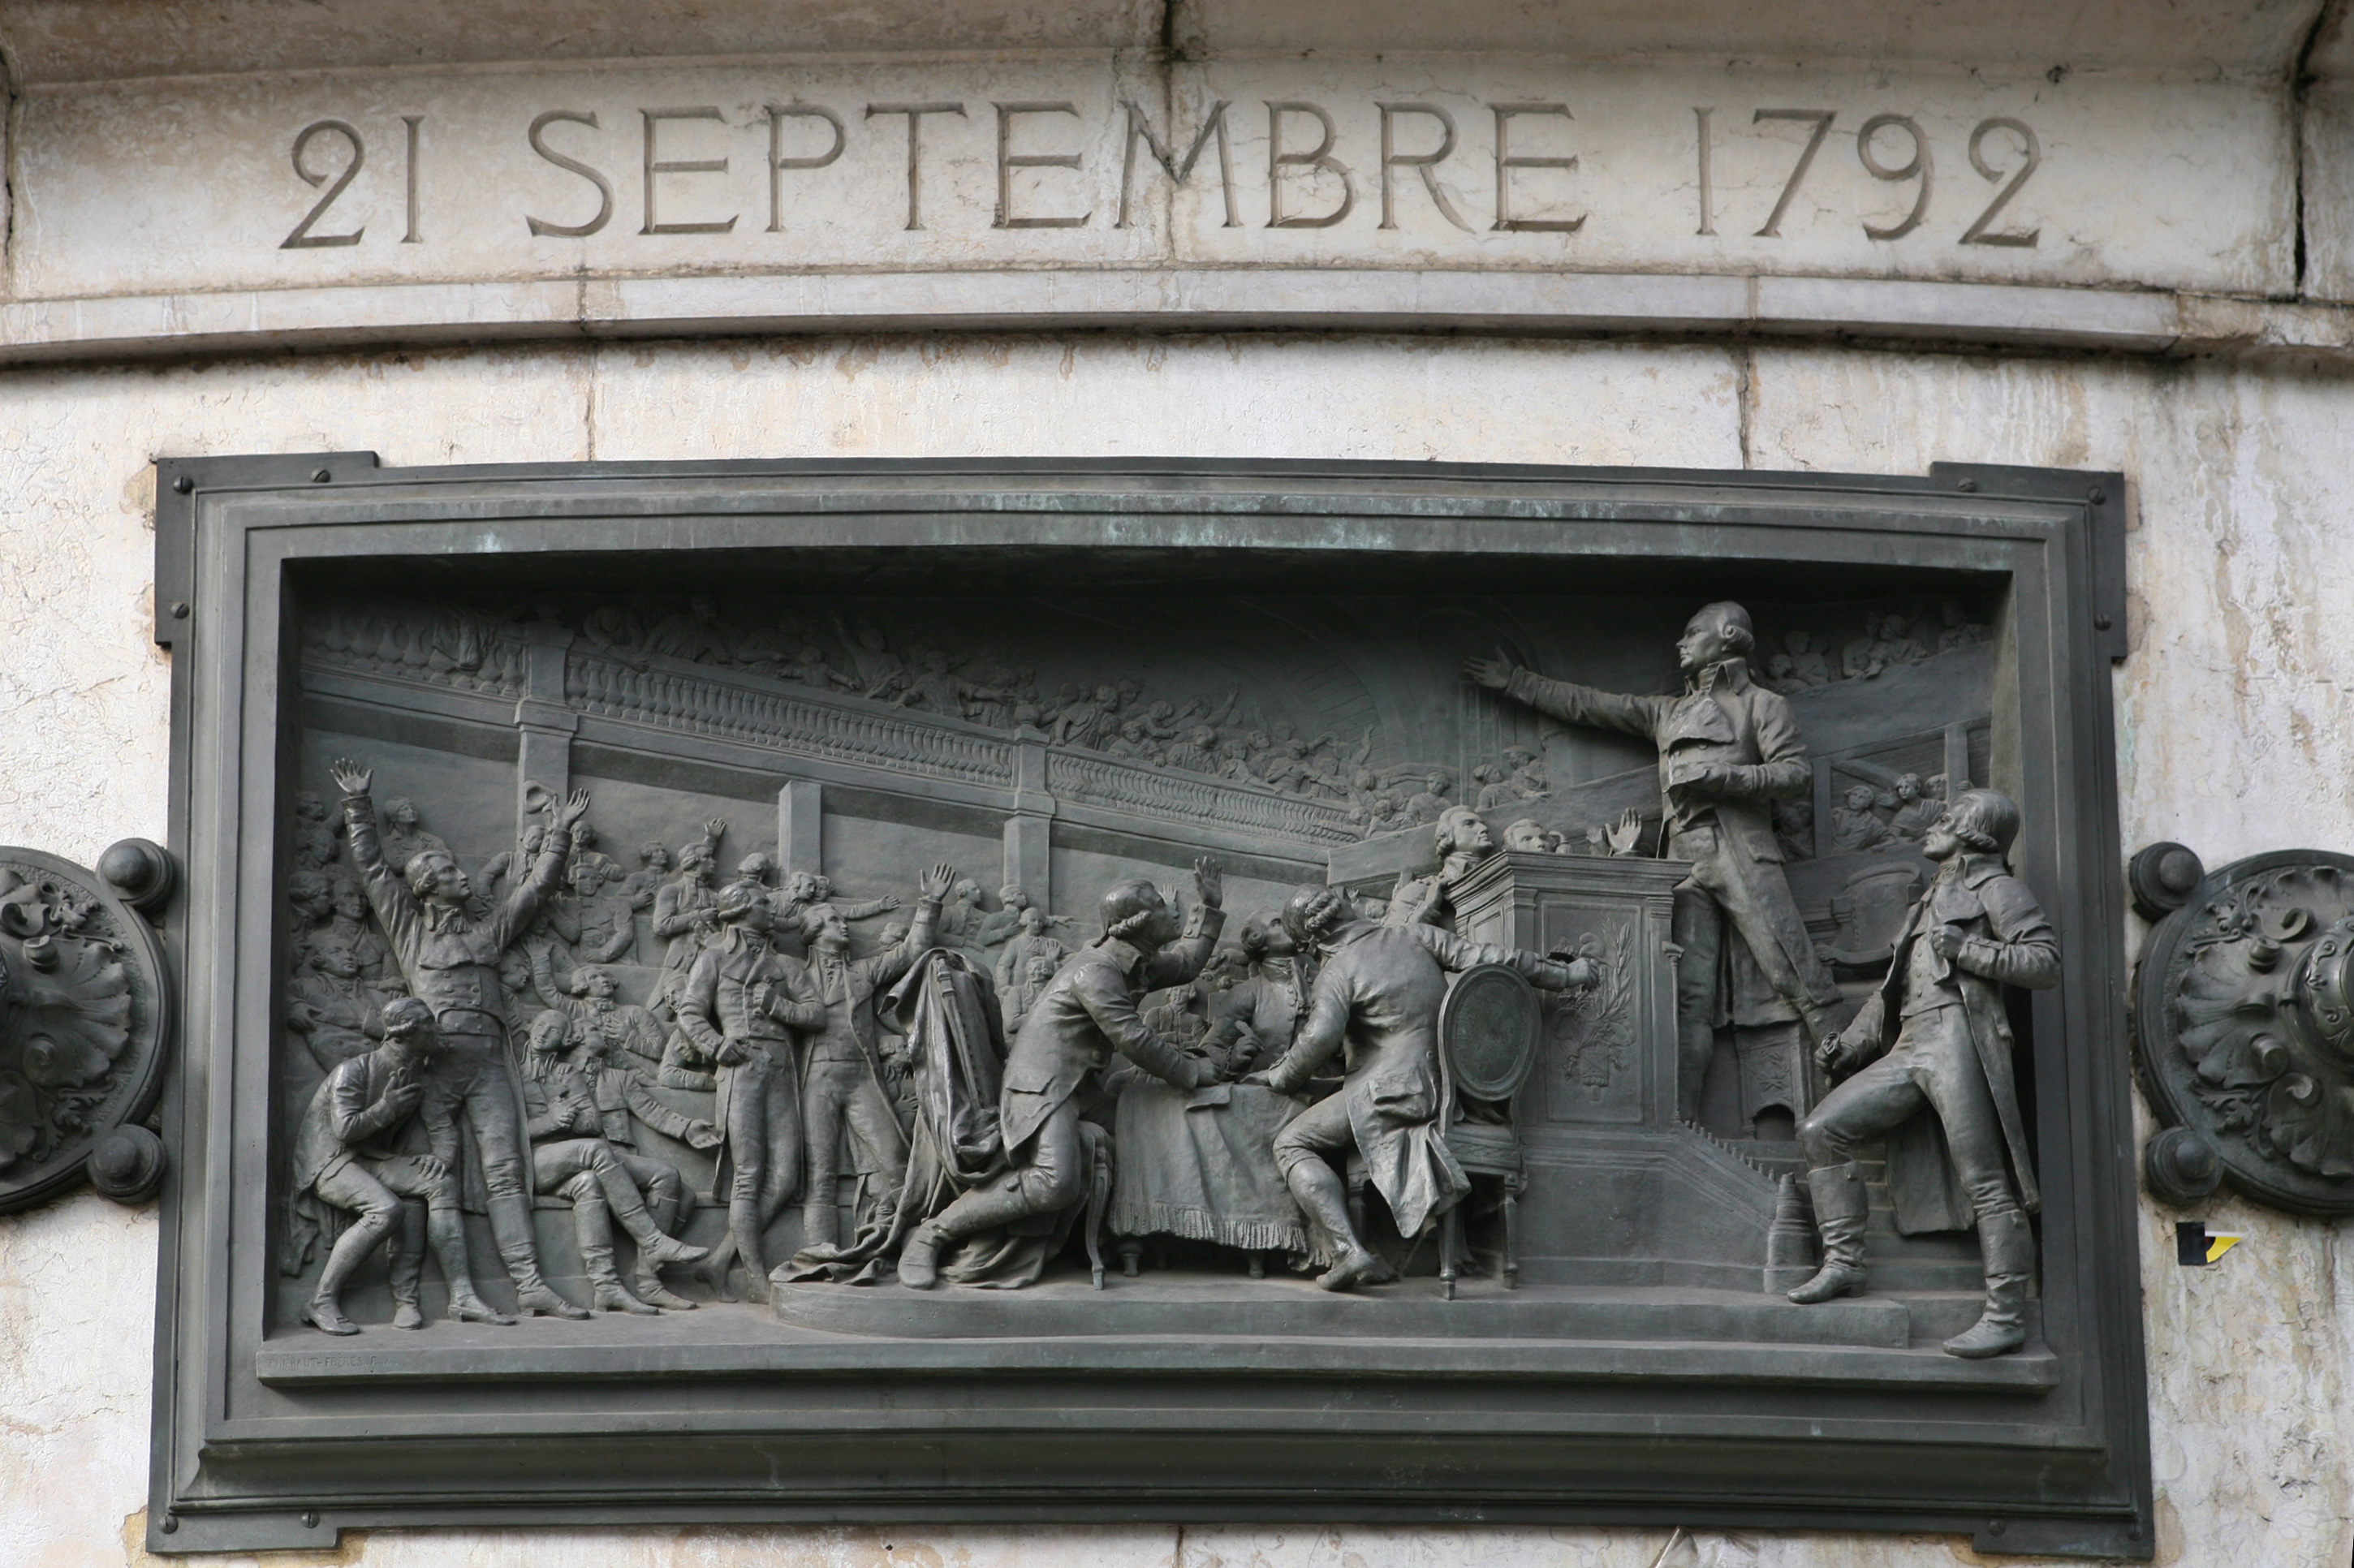 French Revolution: The National Convention declares France a republic and abolishes the monarchy